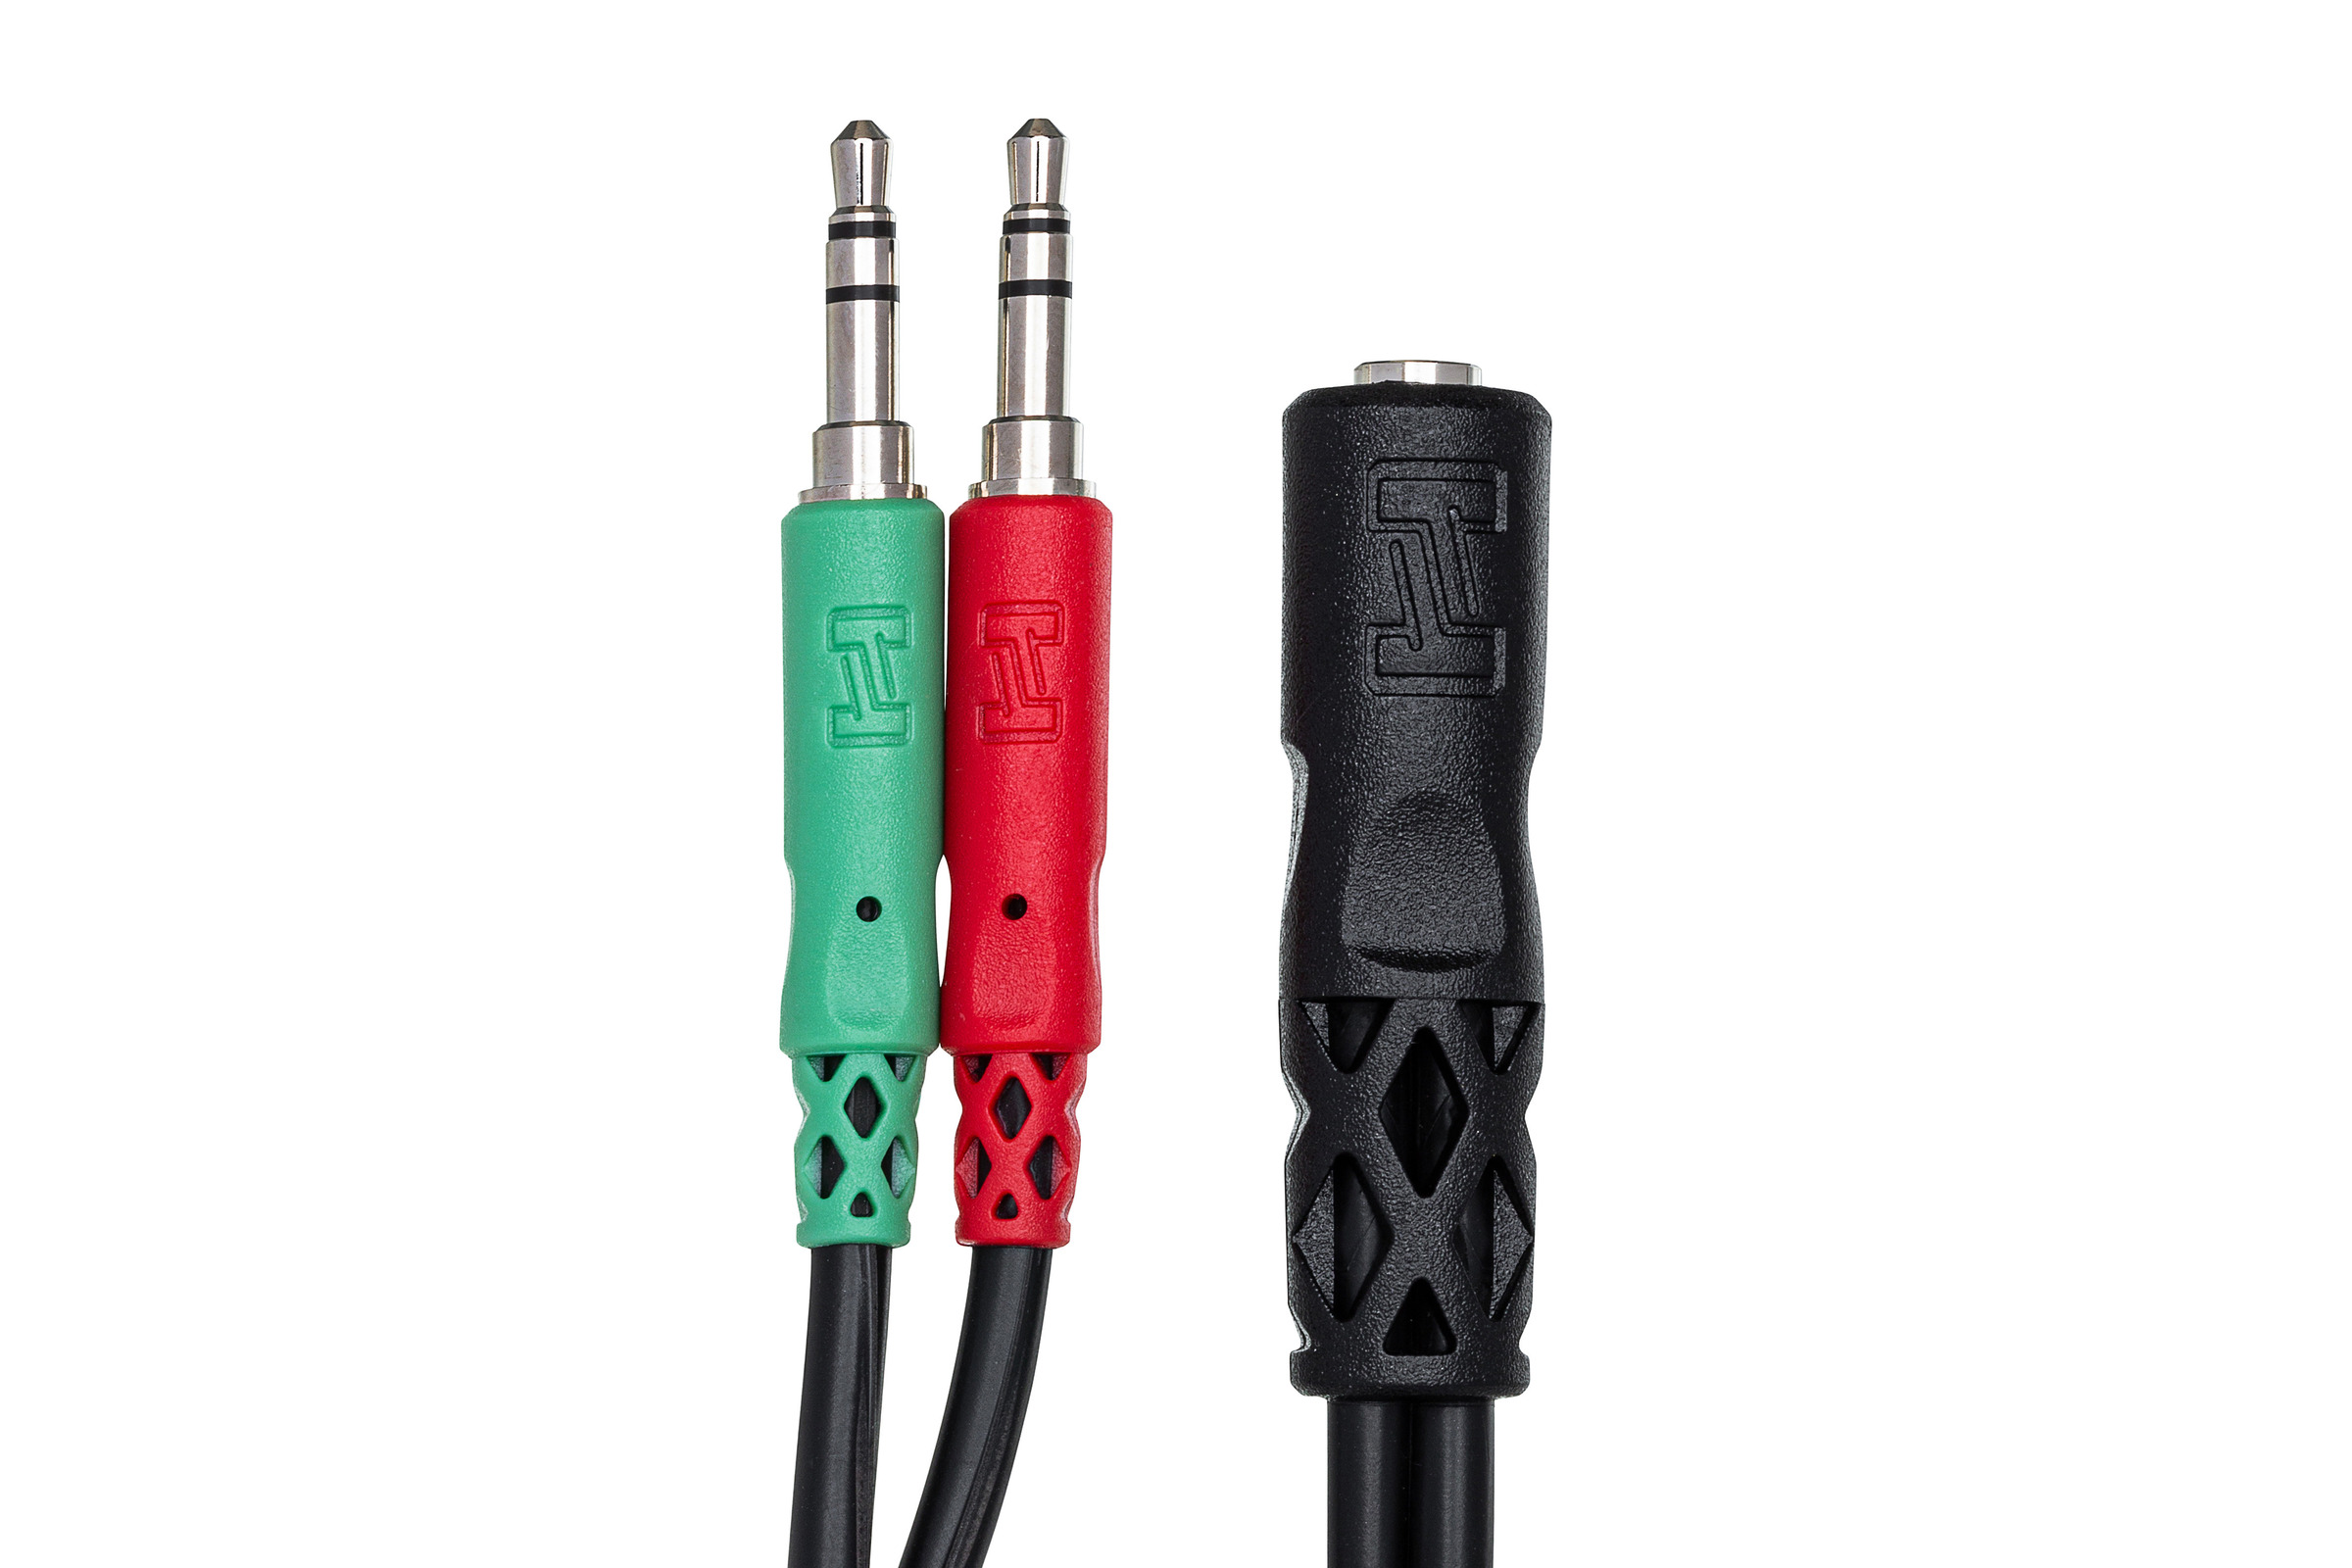 Cascos con cable Jack 3.5 mm HP-008